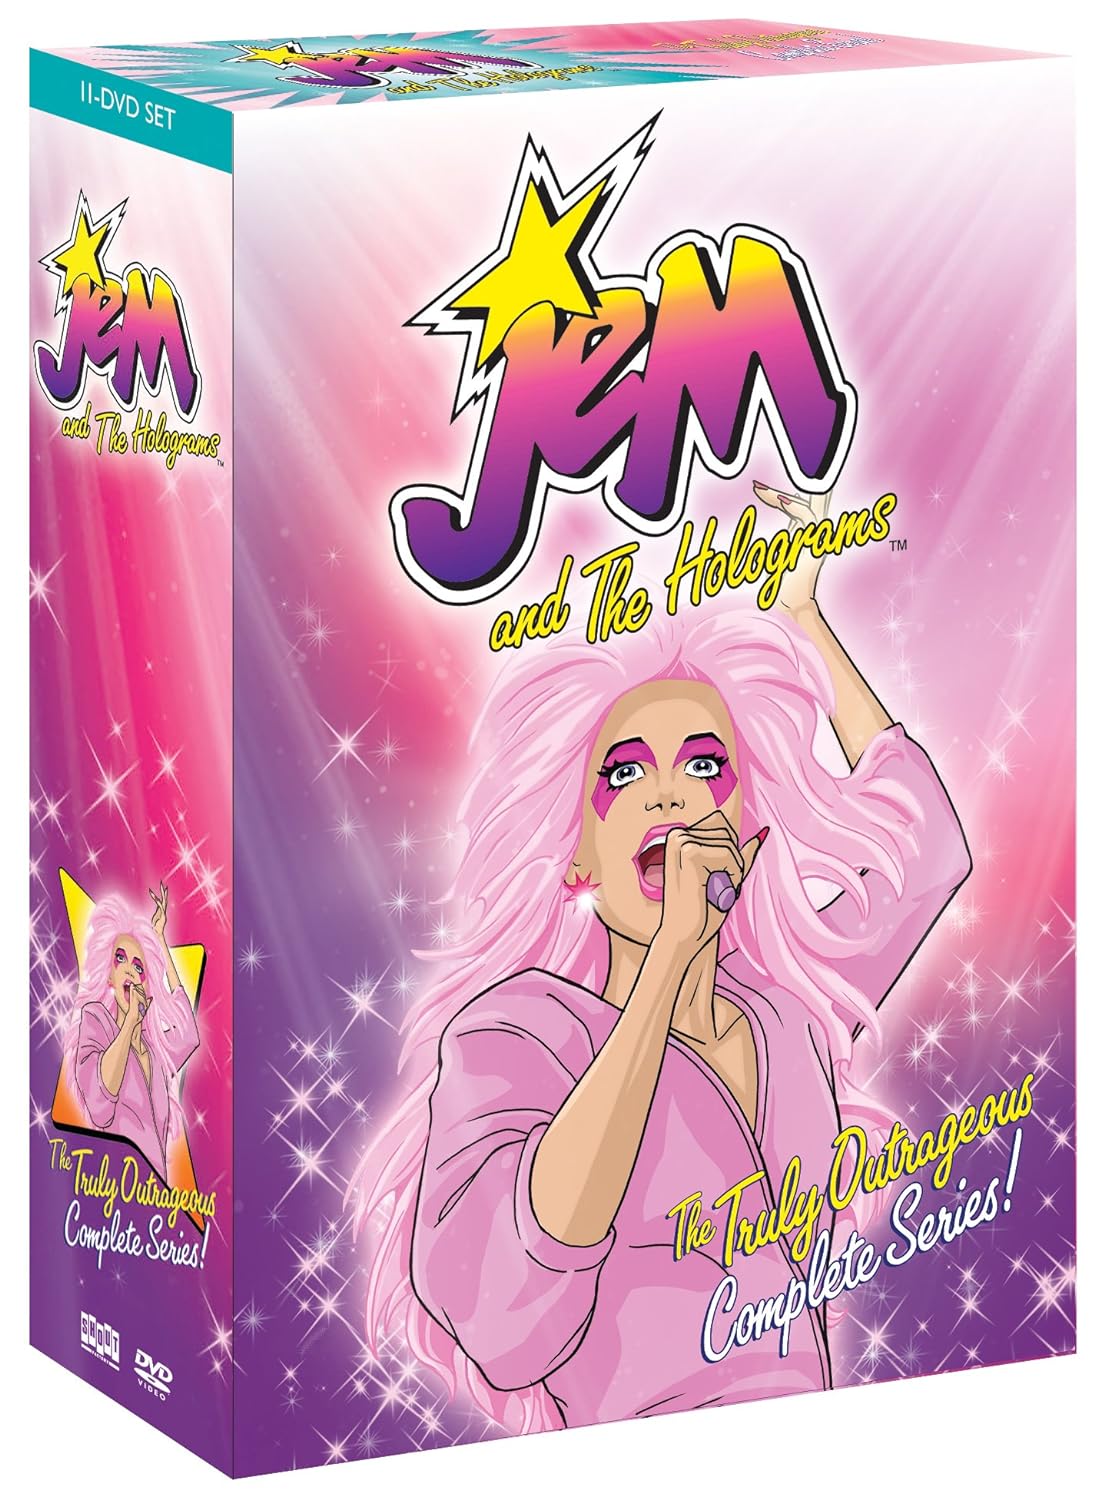 Jem and the holograms truly outrageous